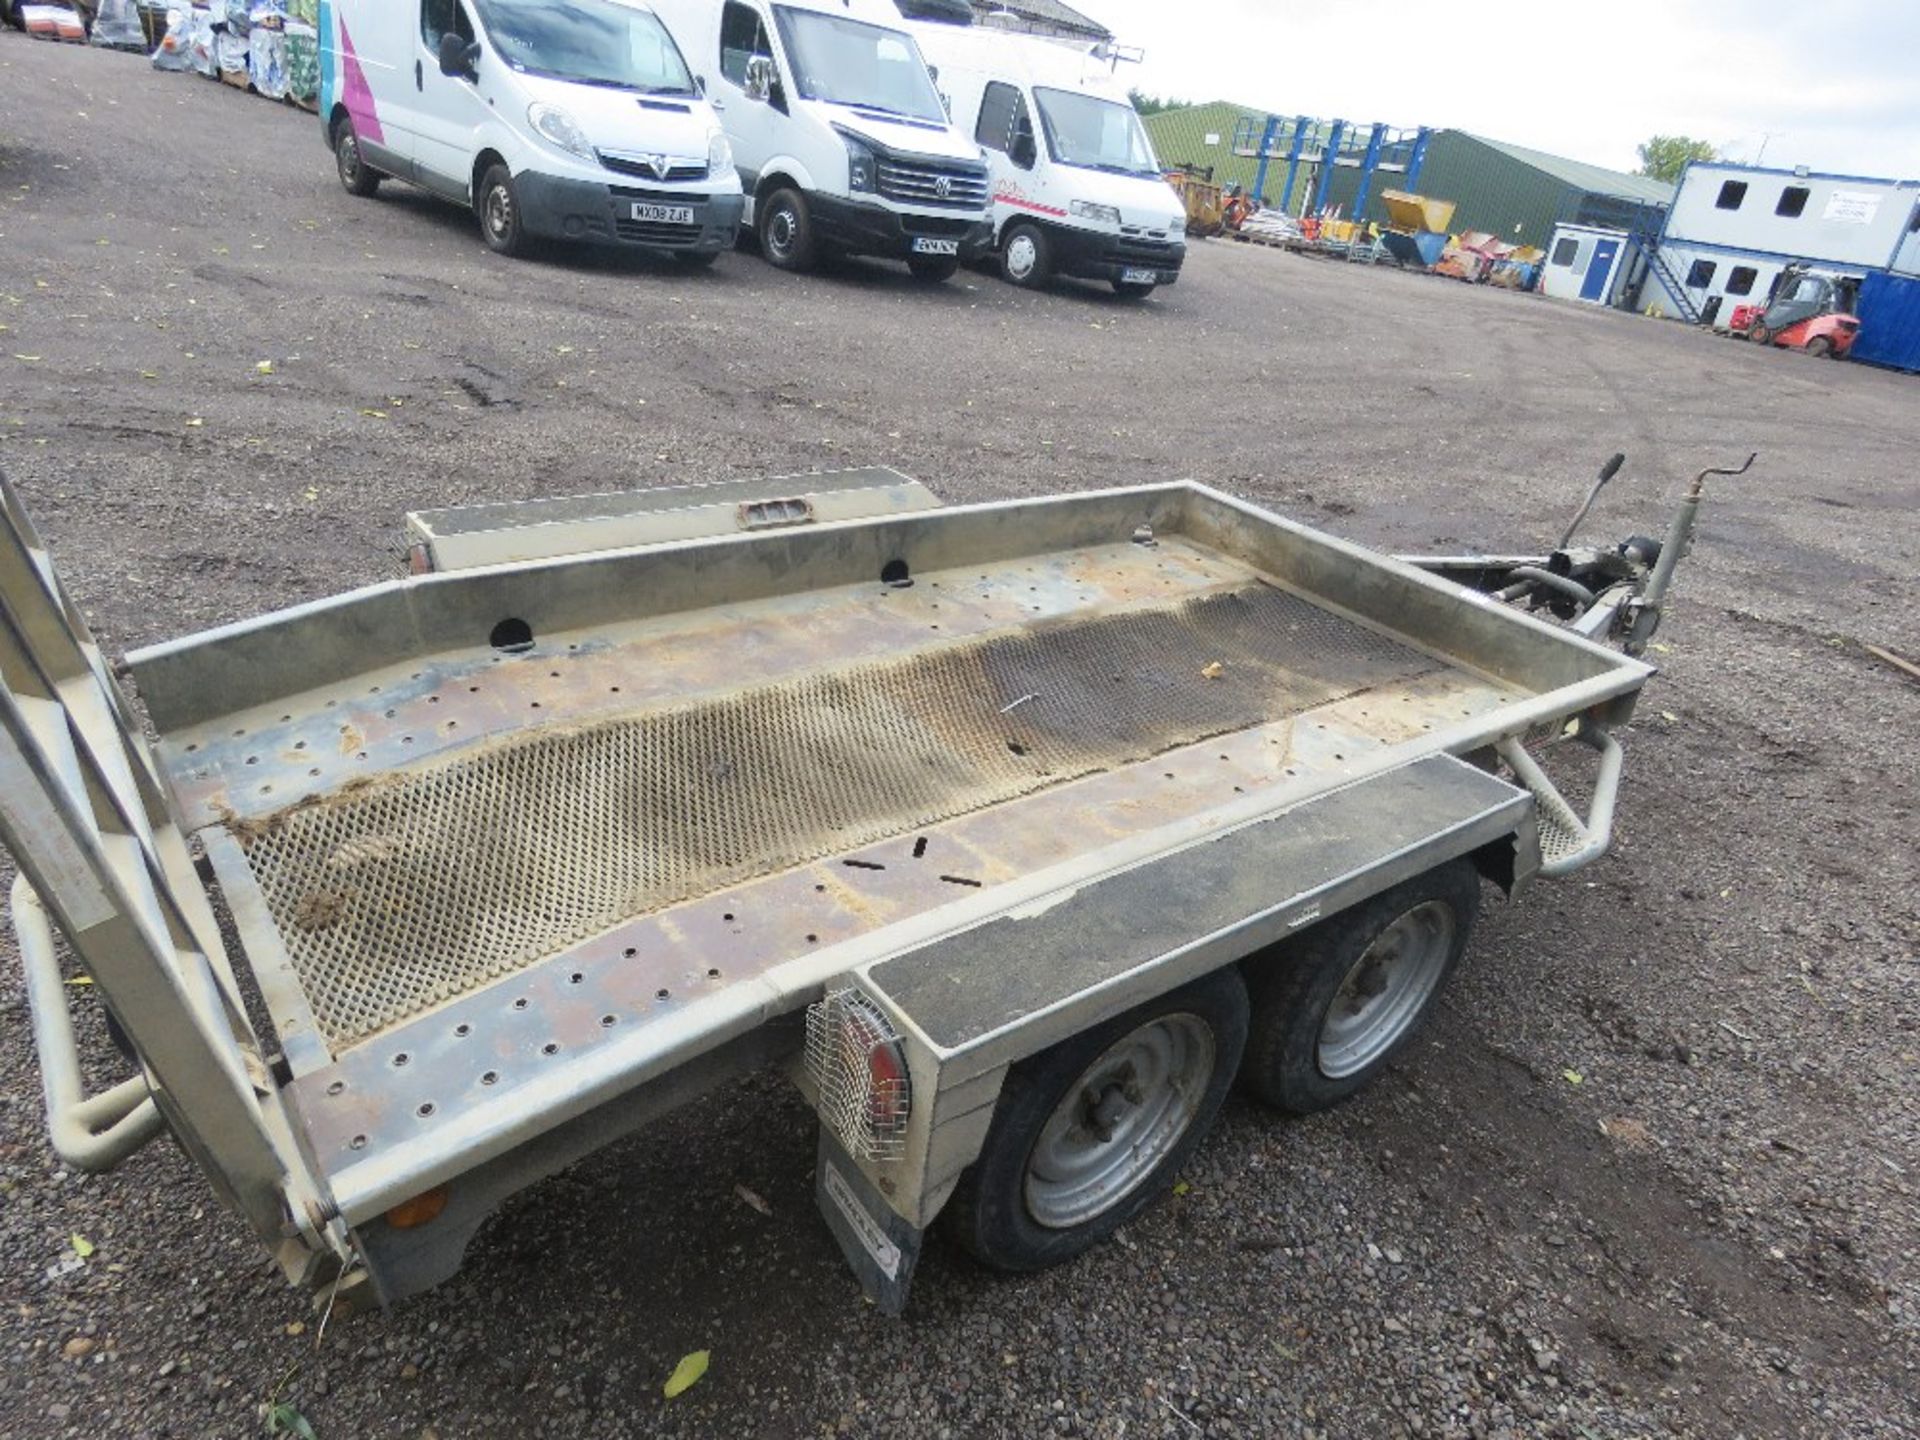 BRADLEY S2600PT TWIN AXLED MINI DIGGER PLANT TRAILER, YEAR 2008, PIVOT AXLE. 8FT X 4FT BED APPROX. - Image 8 of 8